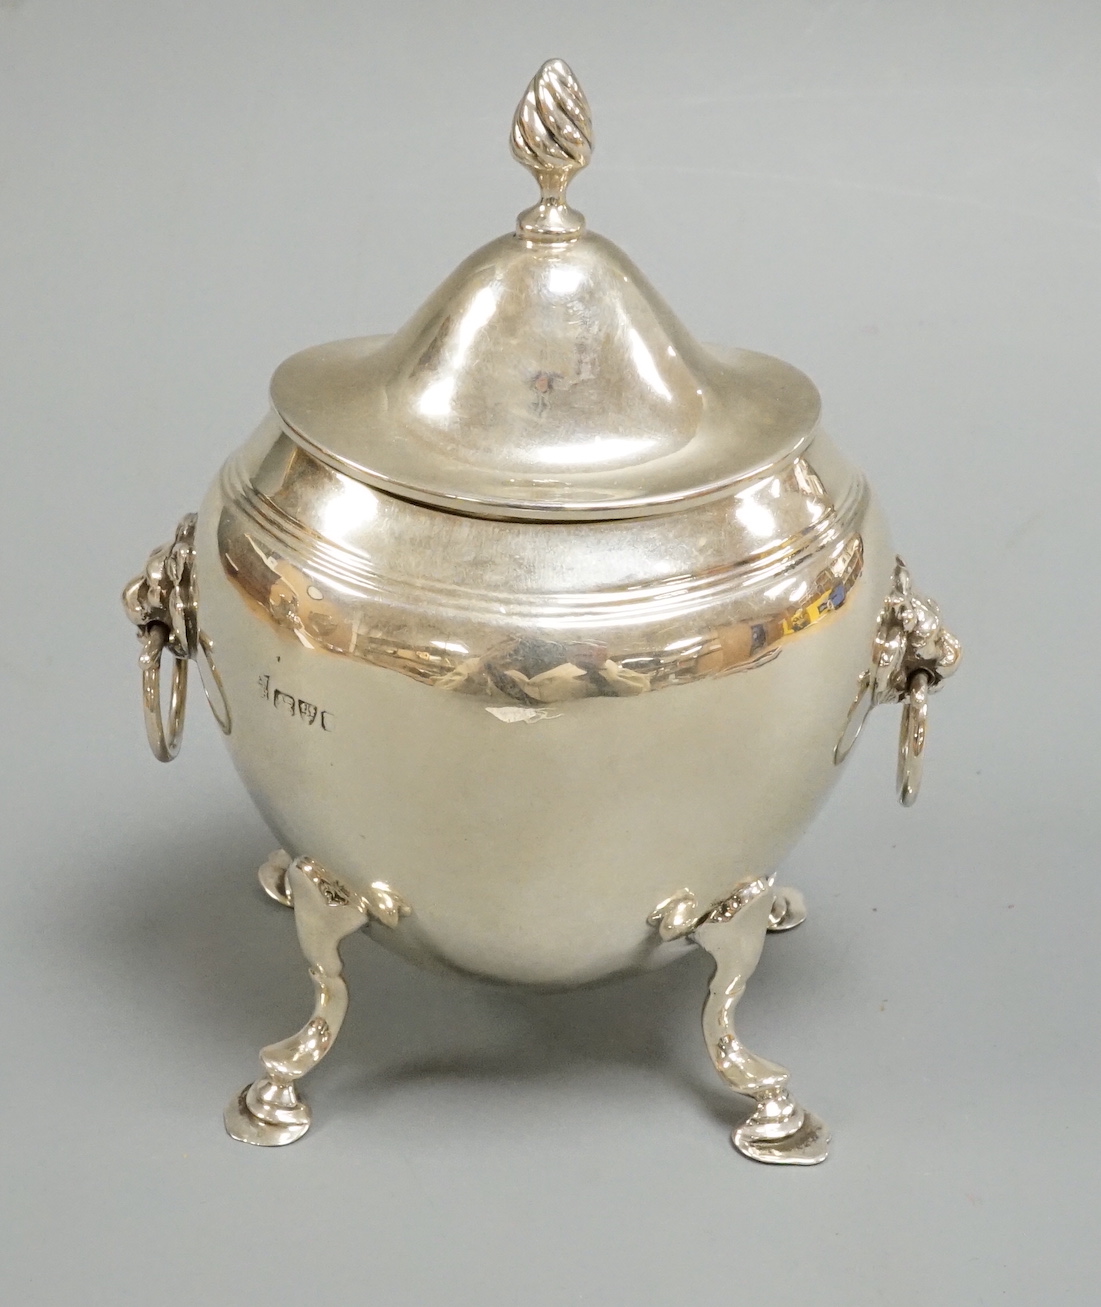 An Edwardian silver cauldron shaped tea caddy, Nathan & Hayes, Chester, 1903, height 12.5cm.